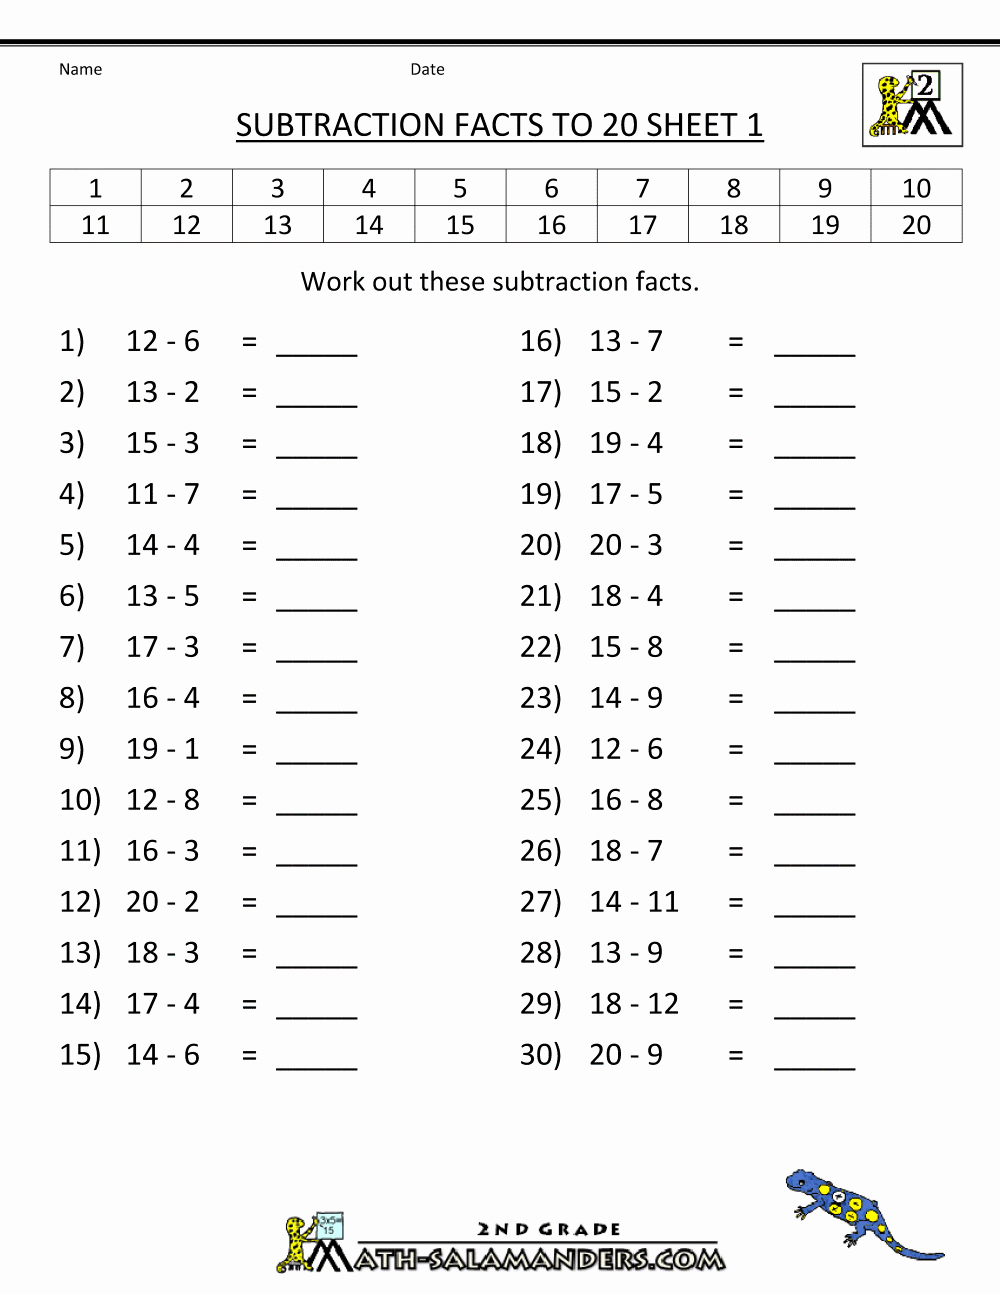 Algebra 2 Worksheet Pdf Awesome Subtraction to 20